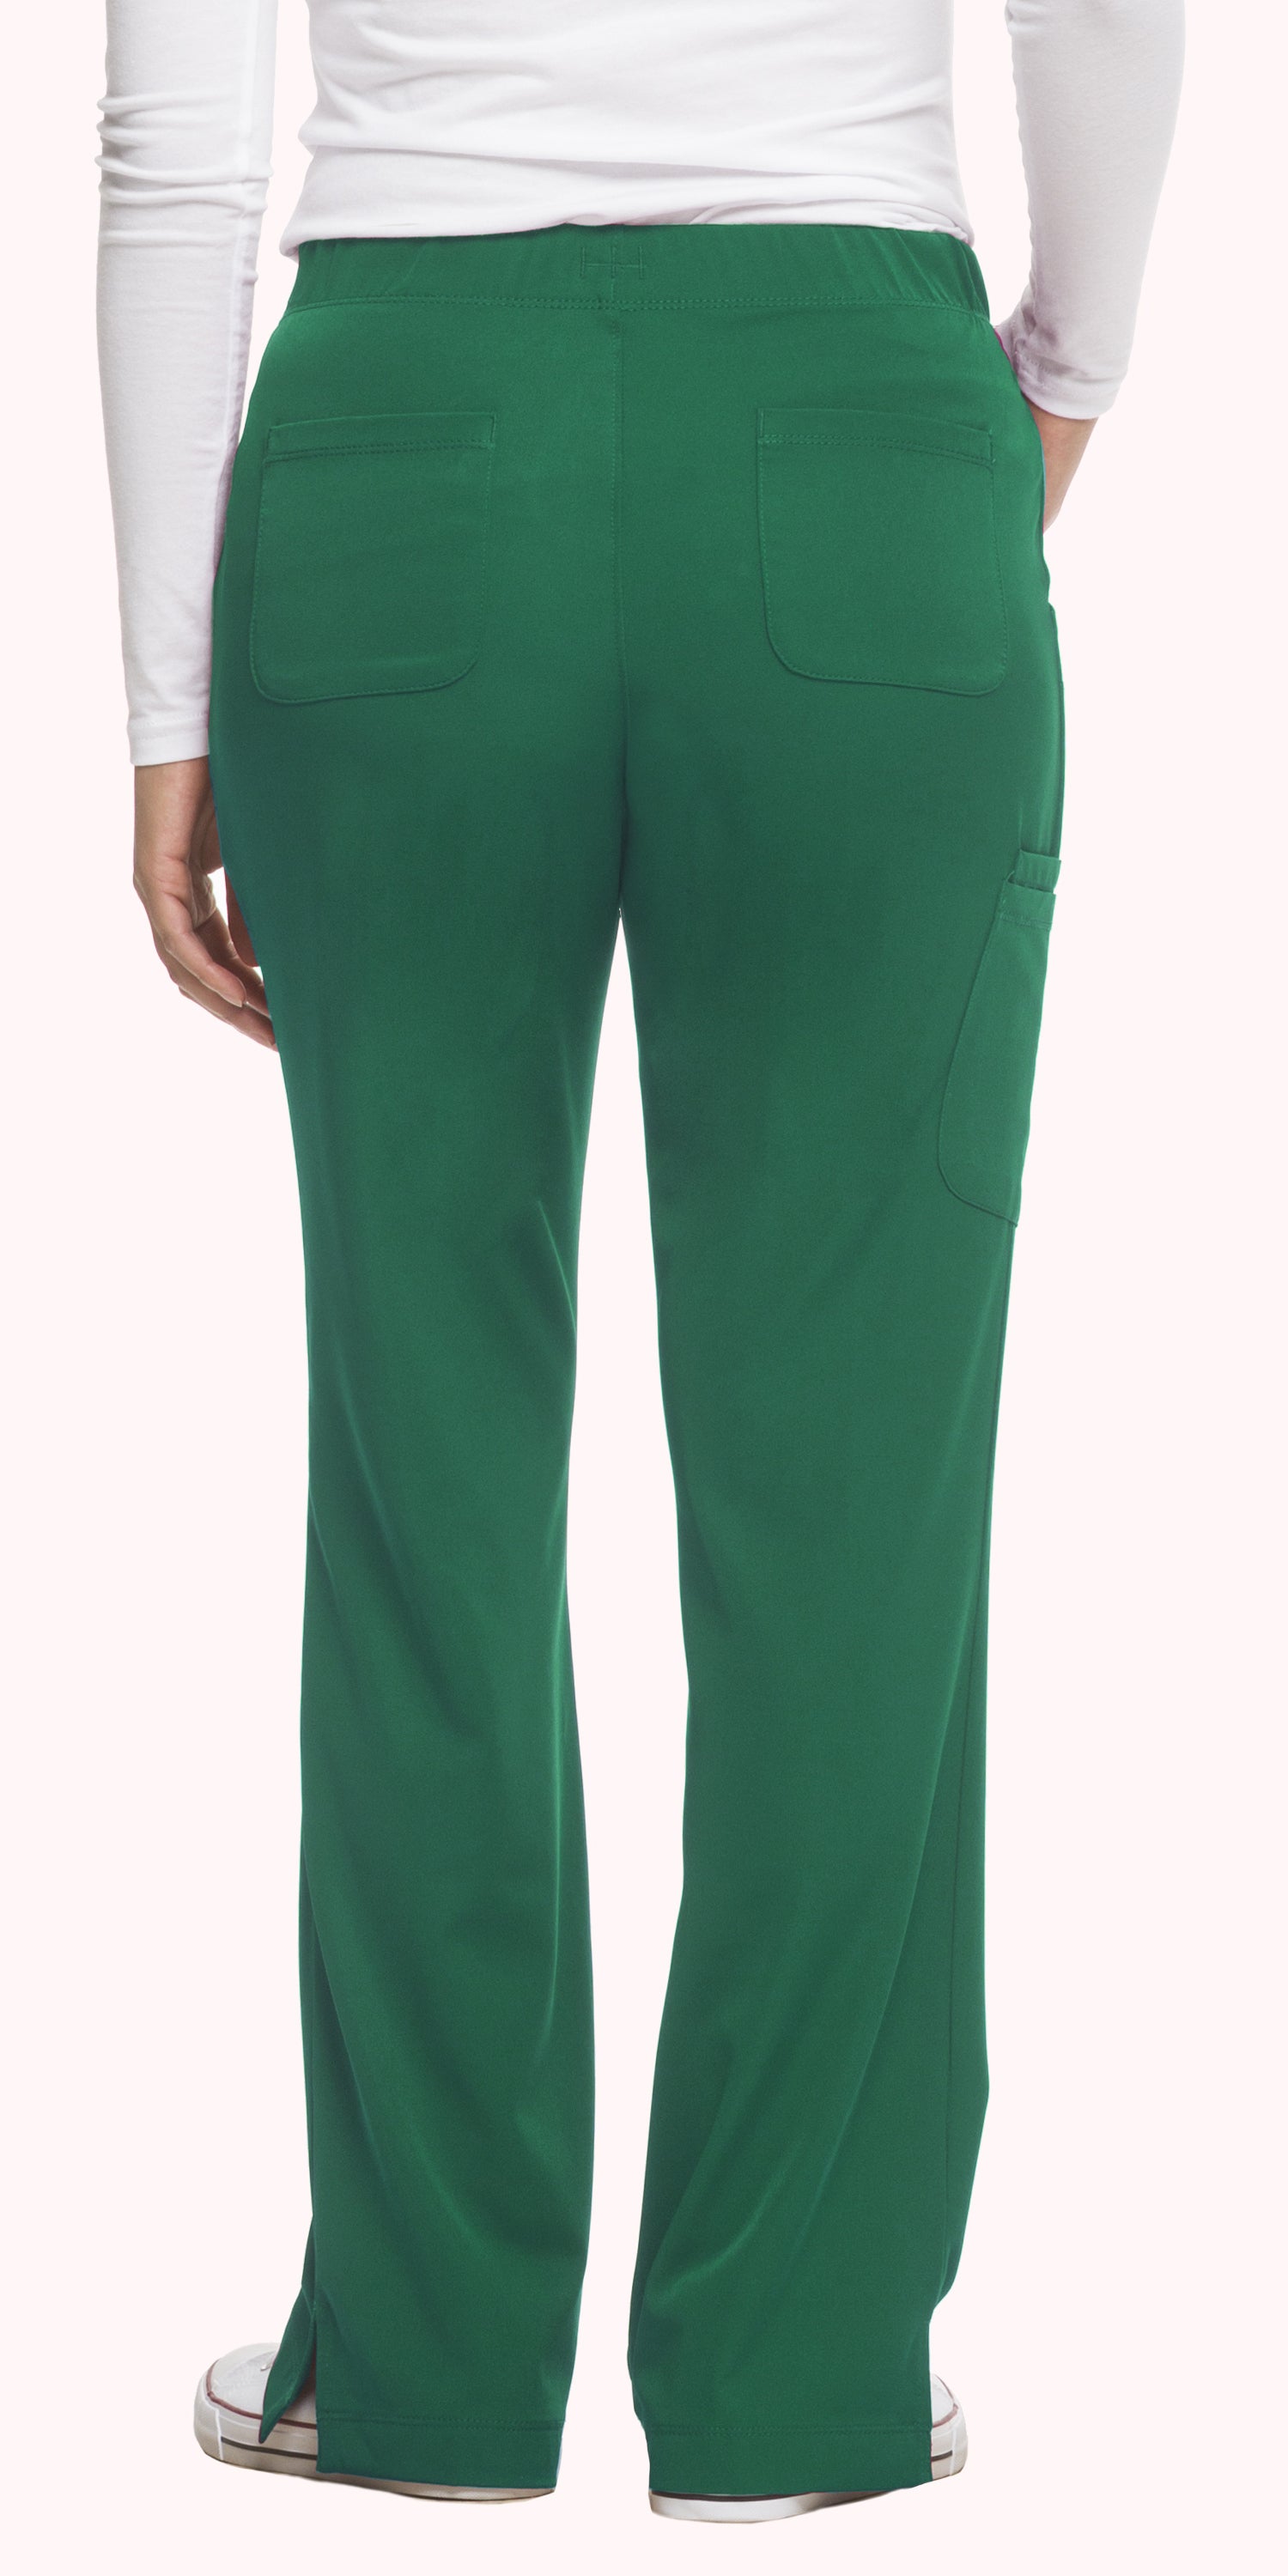 Healing Hands HH Works 9560 Rebecca Women's Pant - PETITE – Valley